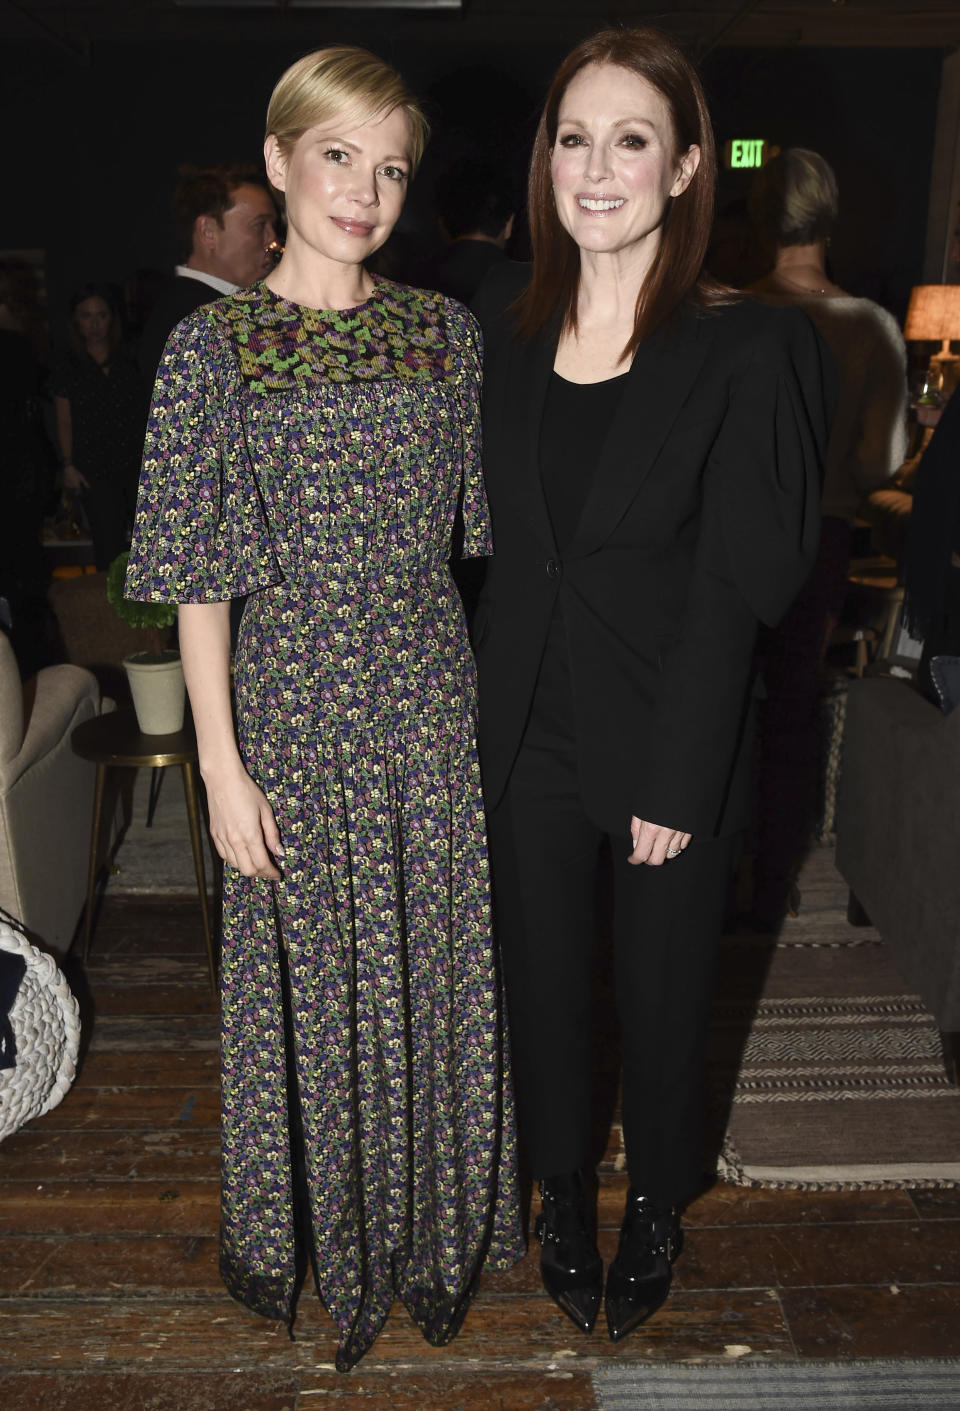 IMAGE DISTRIBUTED FOR CHASE SAPPHIRE - Actress Julianne Moore, right, and actress Michelle Williams seen at the Chase Sapphire hosted "After the Wedding" after party at Chase Sapphire on Main at Sundance Film Festival 2019 on Thursday January 24, 2019 in Park City, Utah. (Photo by Dan Steinberg/Invision for Chase Sapphire/AP Images)